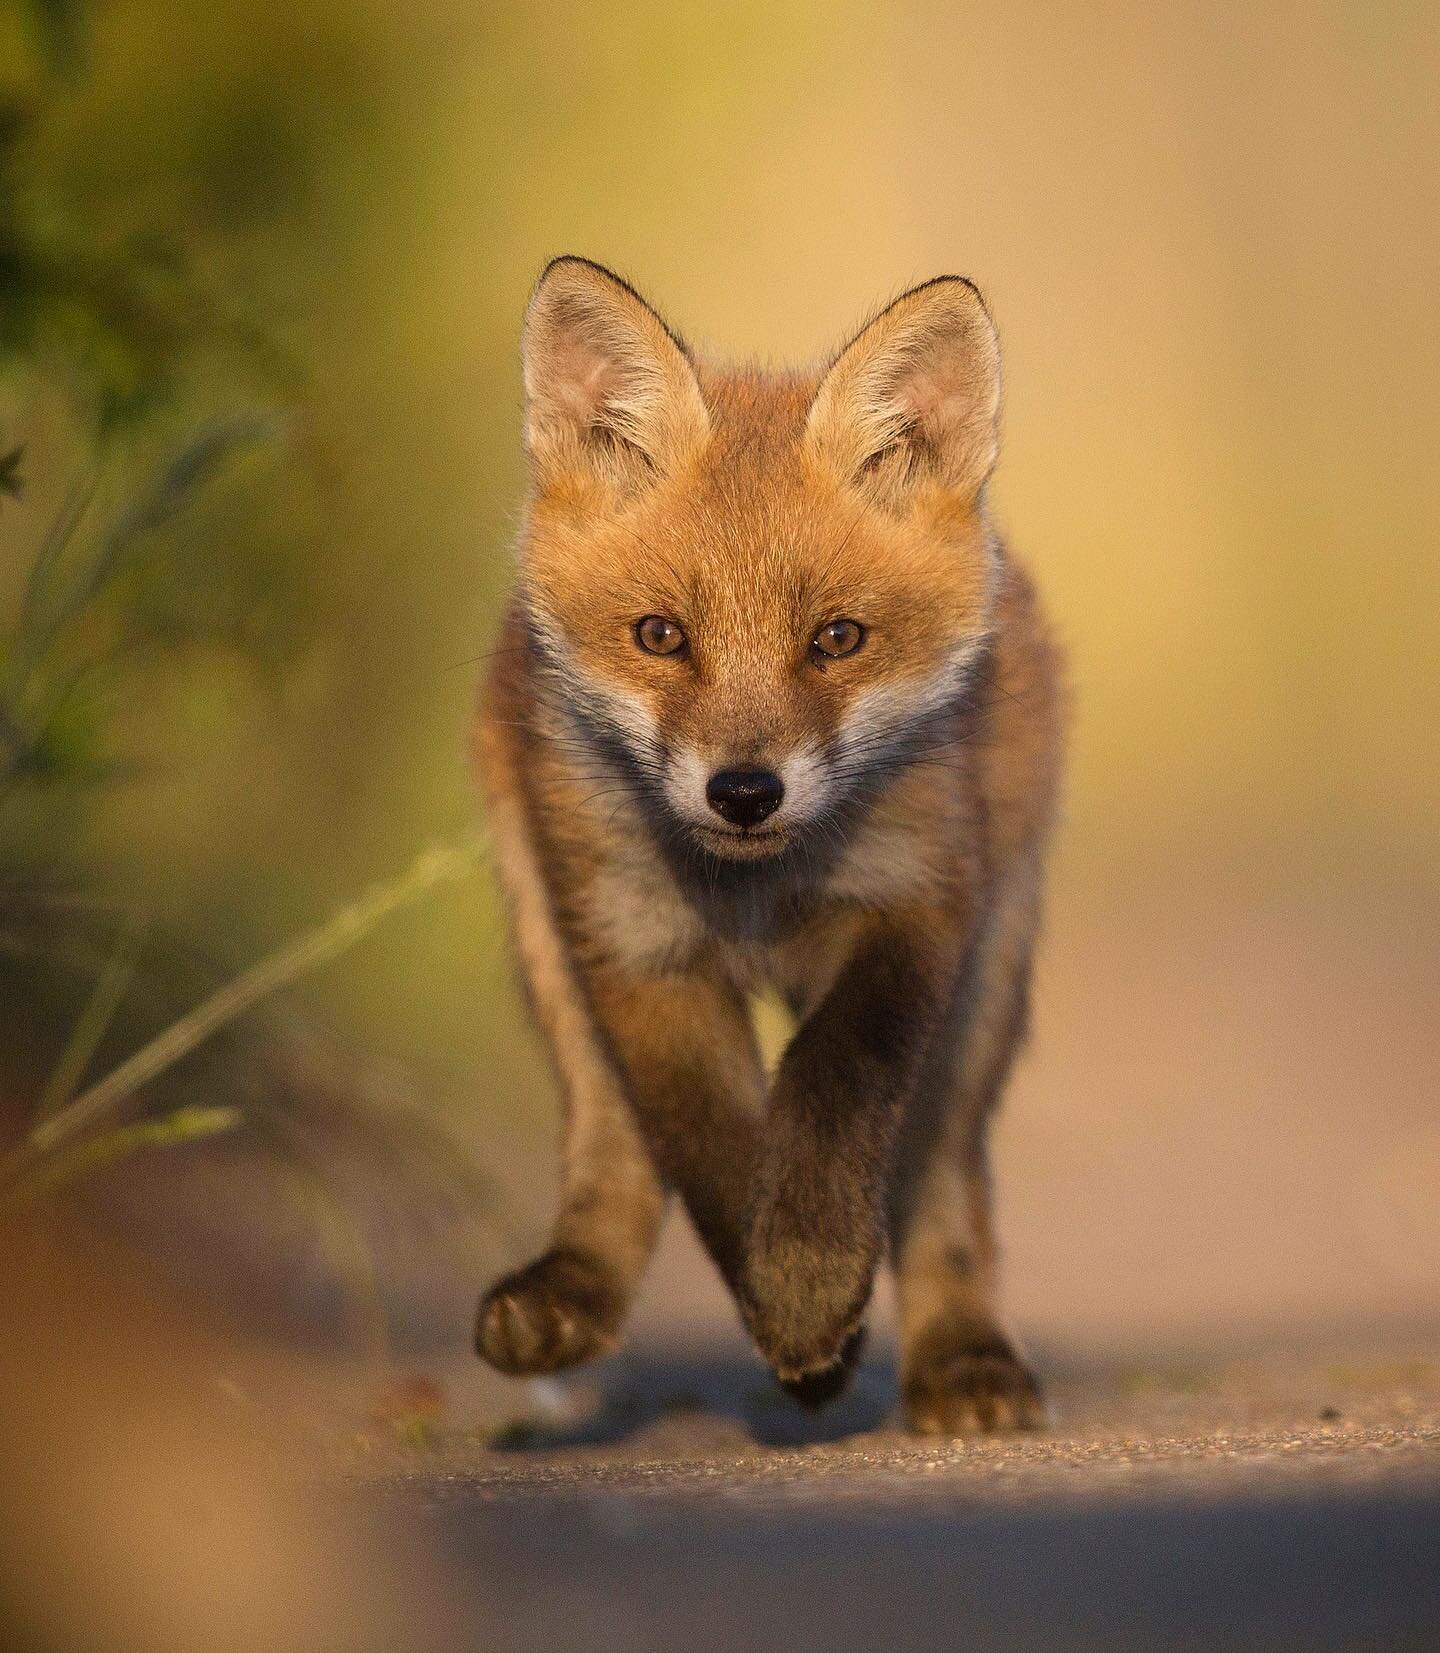 Springtime Fox Cub 🦊 I was photographing a Fox vixen in beautiful evening light, when I noticed movement in a nearby bush. My settings were perfect for a stationary portrait, but the aperture I was using was far too shallow to properly capture any m